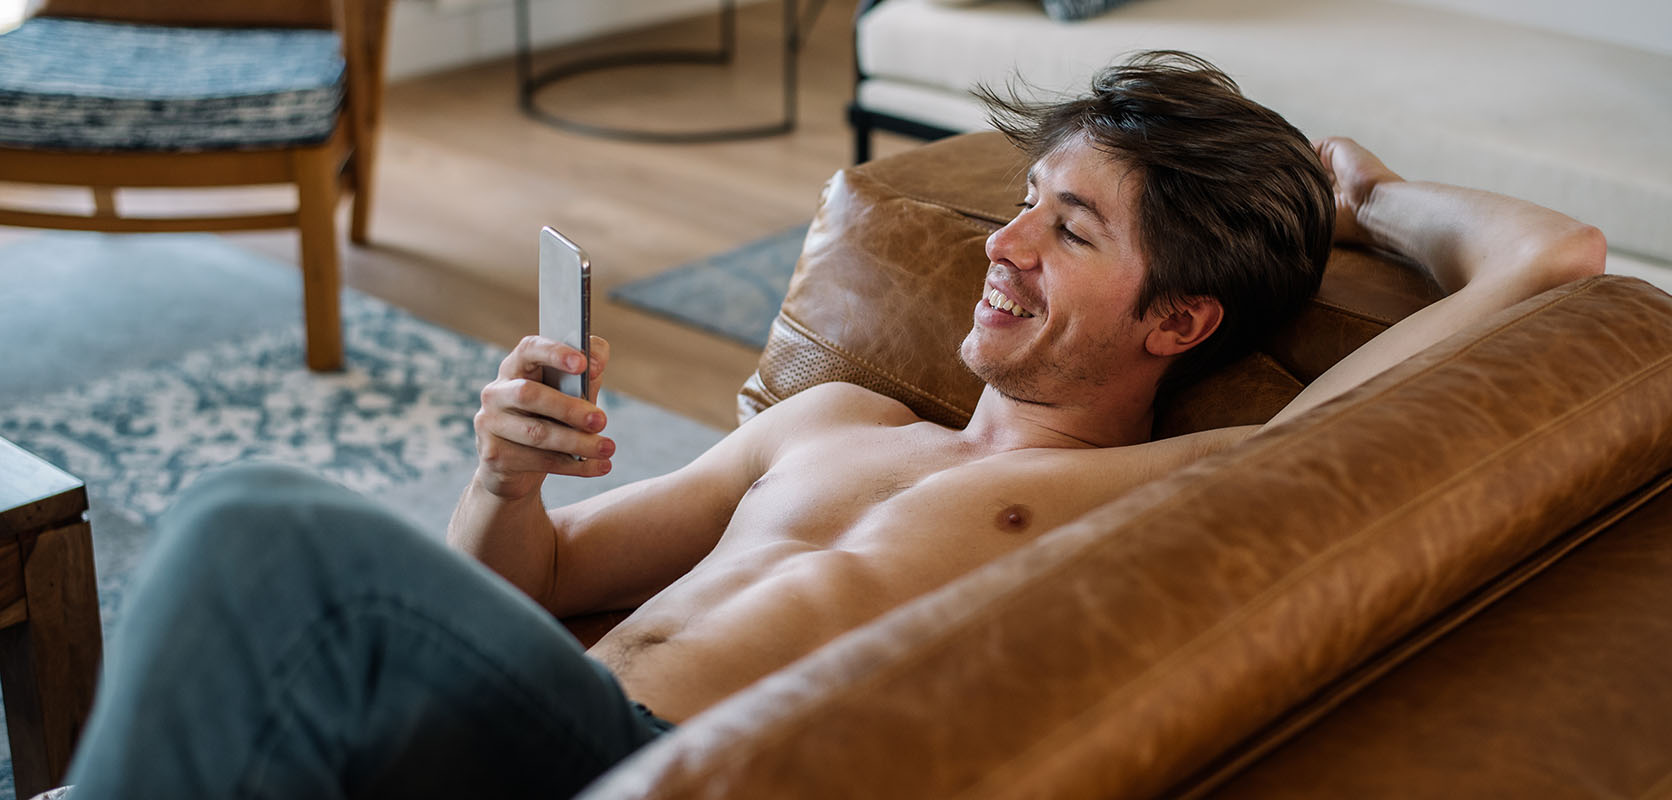 Man relaxing at home and on his phone buying weed online in canada